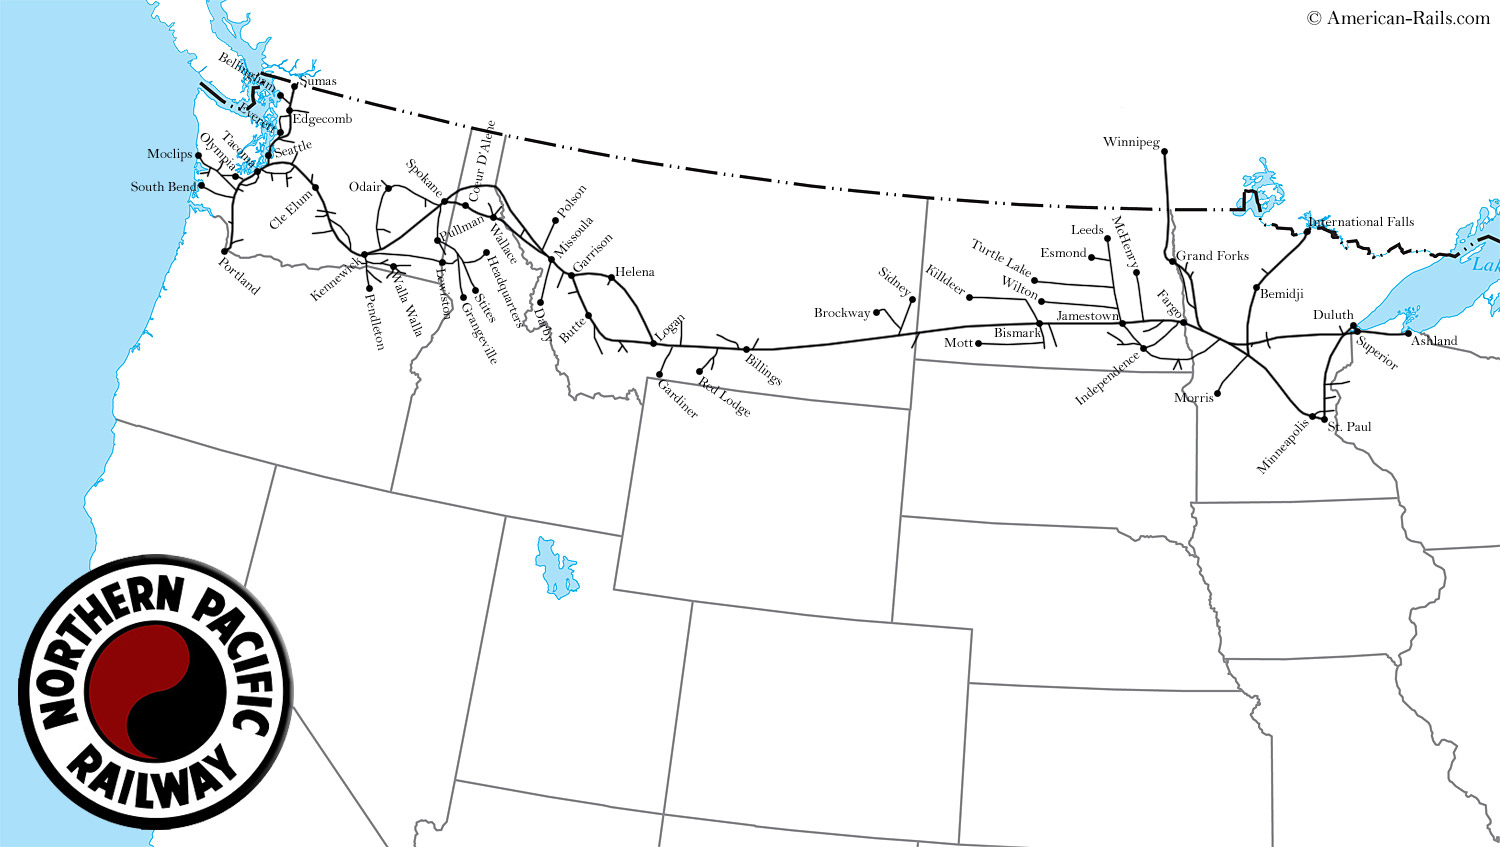 Northern Pacific Railroad System Map - 1900